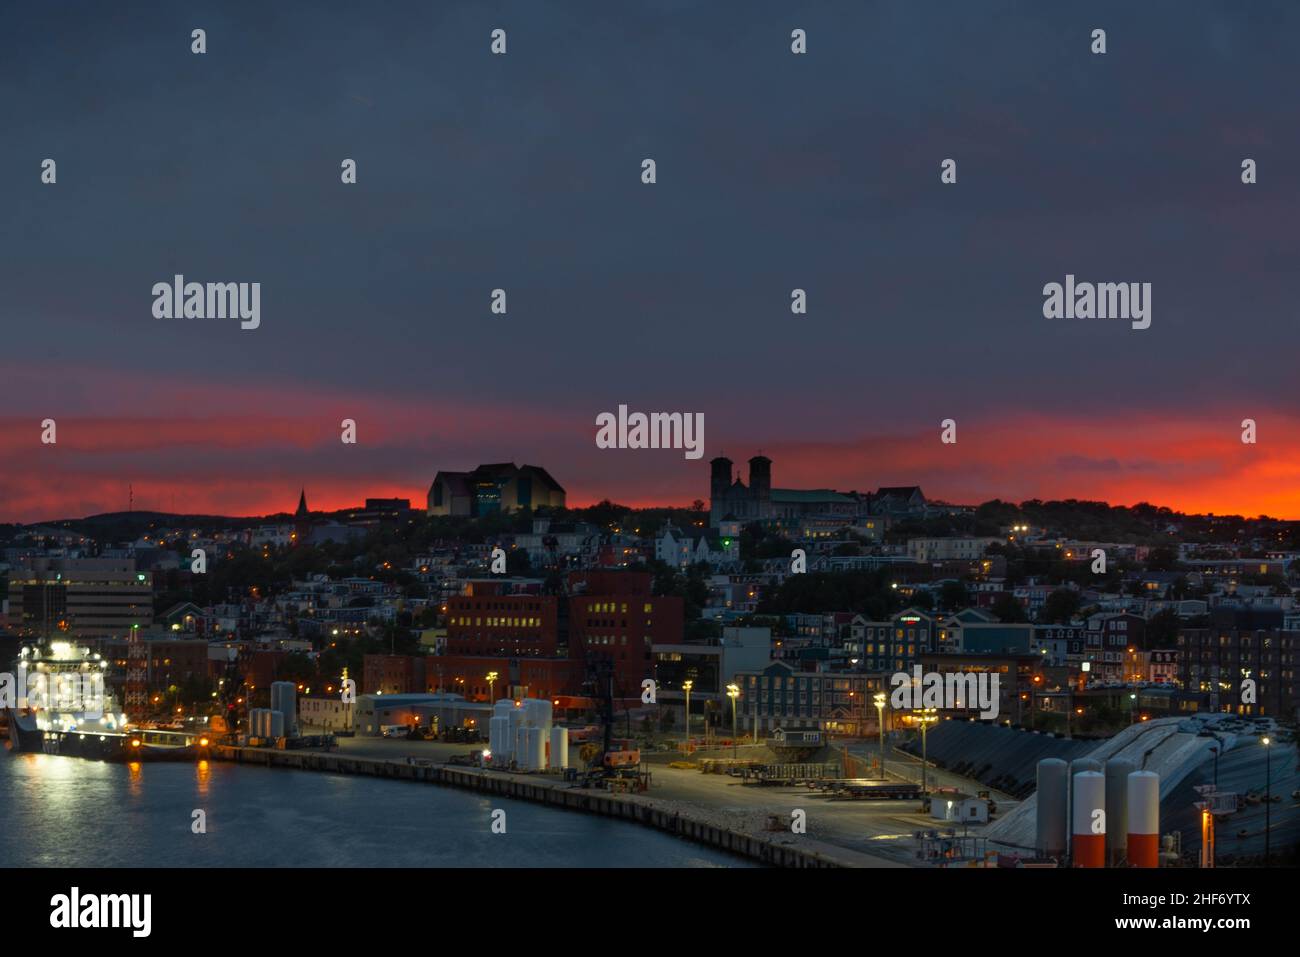 St. John's, Newfoundland, Canada-January 2022: A nighttime view of downtown St. John's skyline with an orange glow in the sky at sunset. Stock Photo